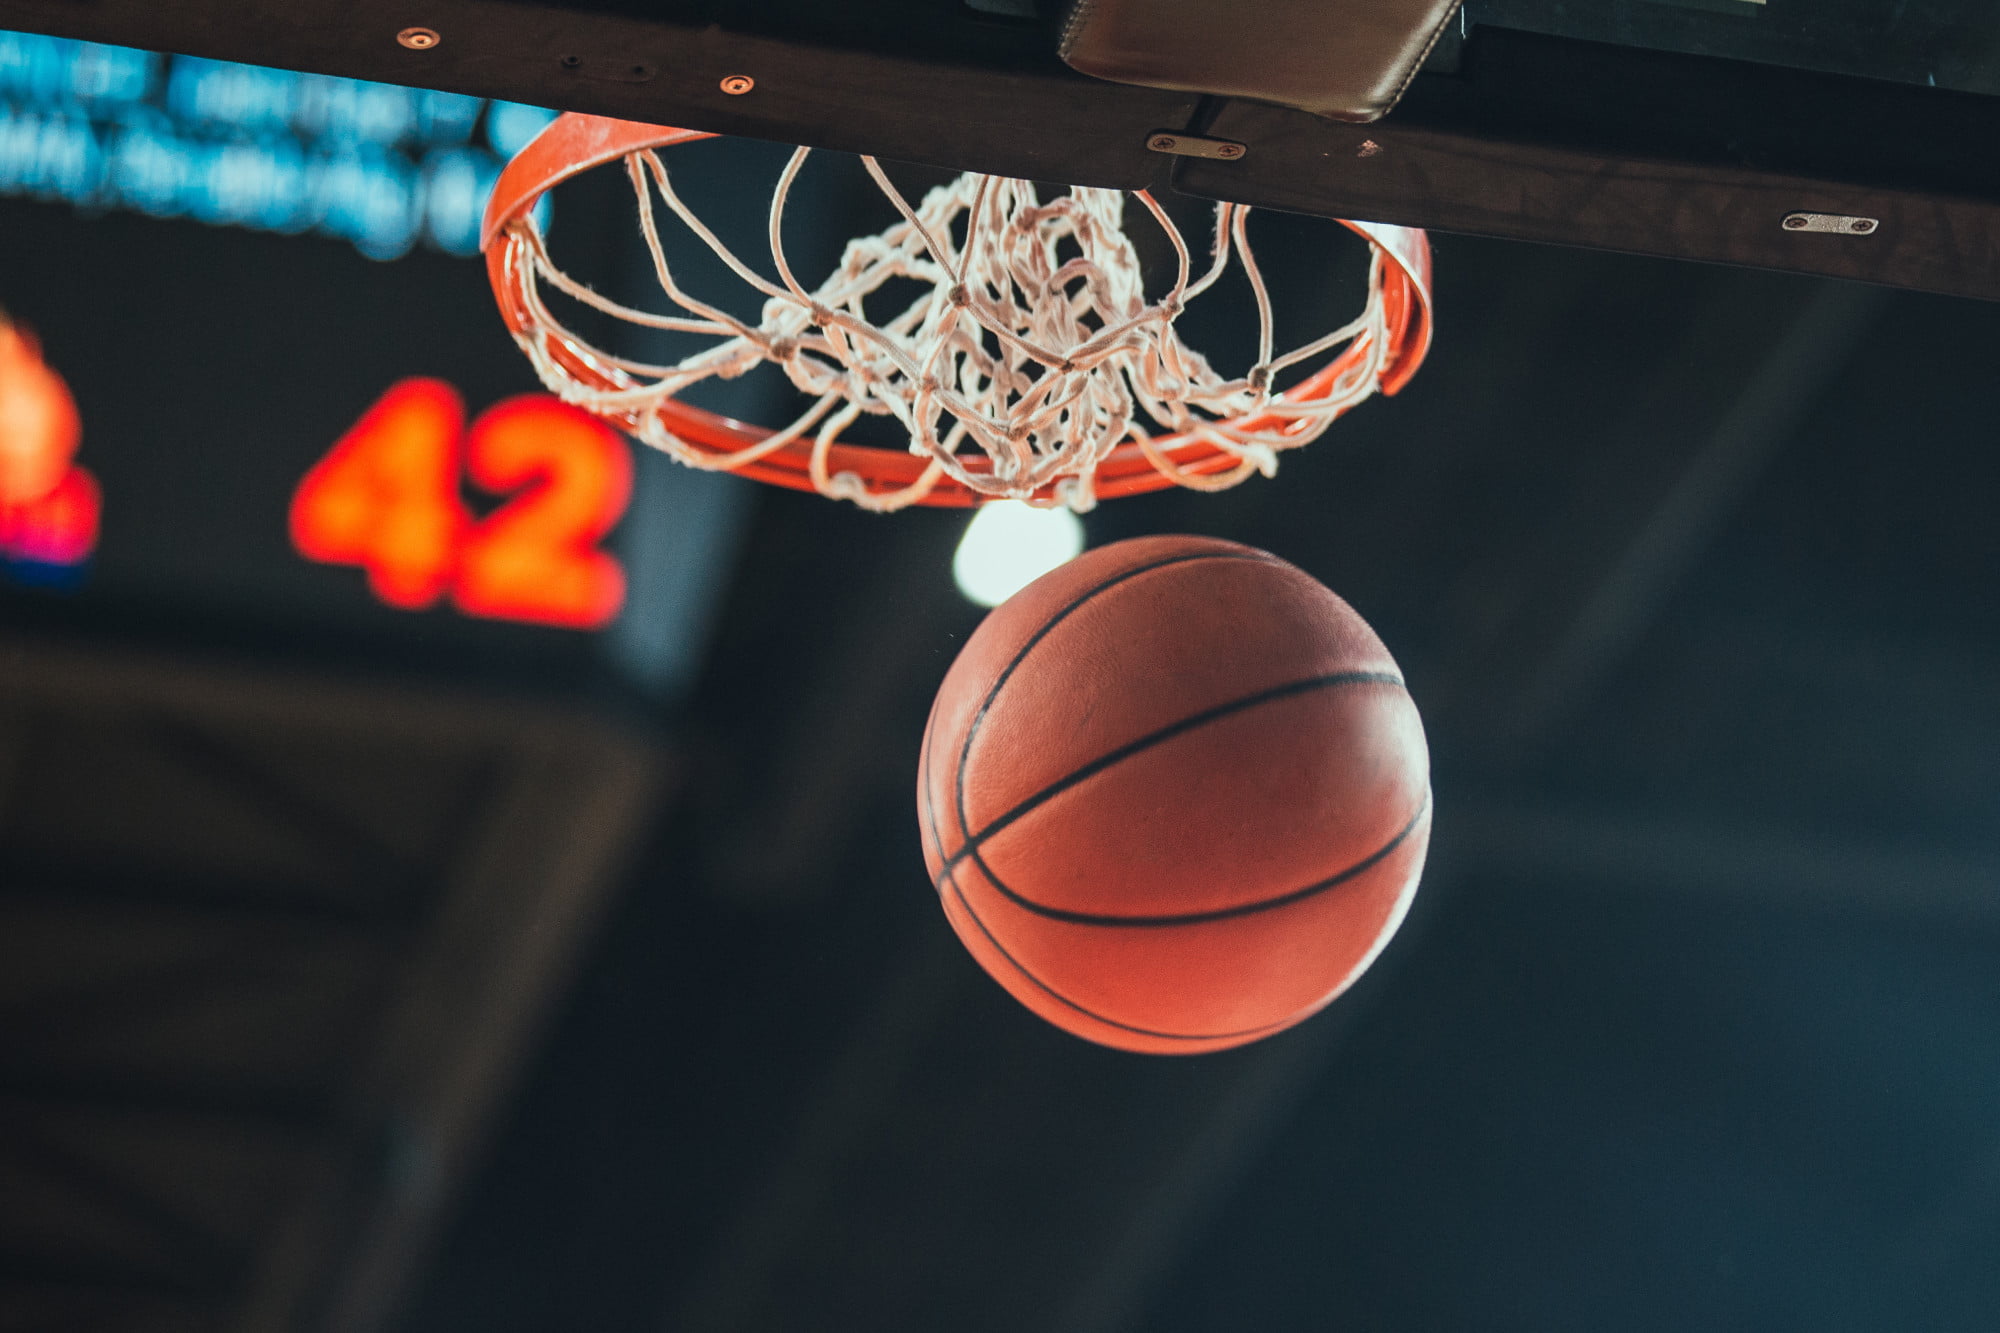 The NBA is one of the best leagues to bet on, especially when the NBA playoffs are happening. Here's what to know about betting on them!